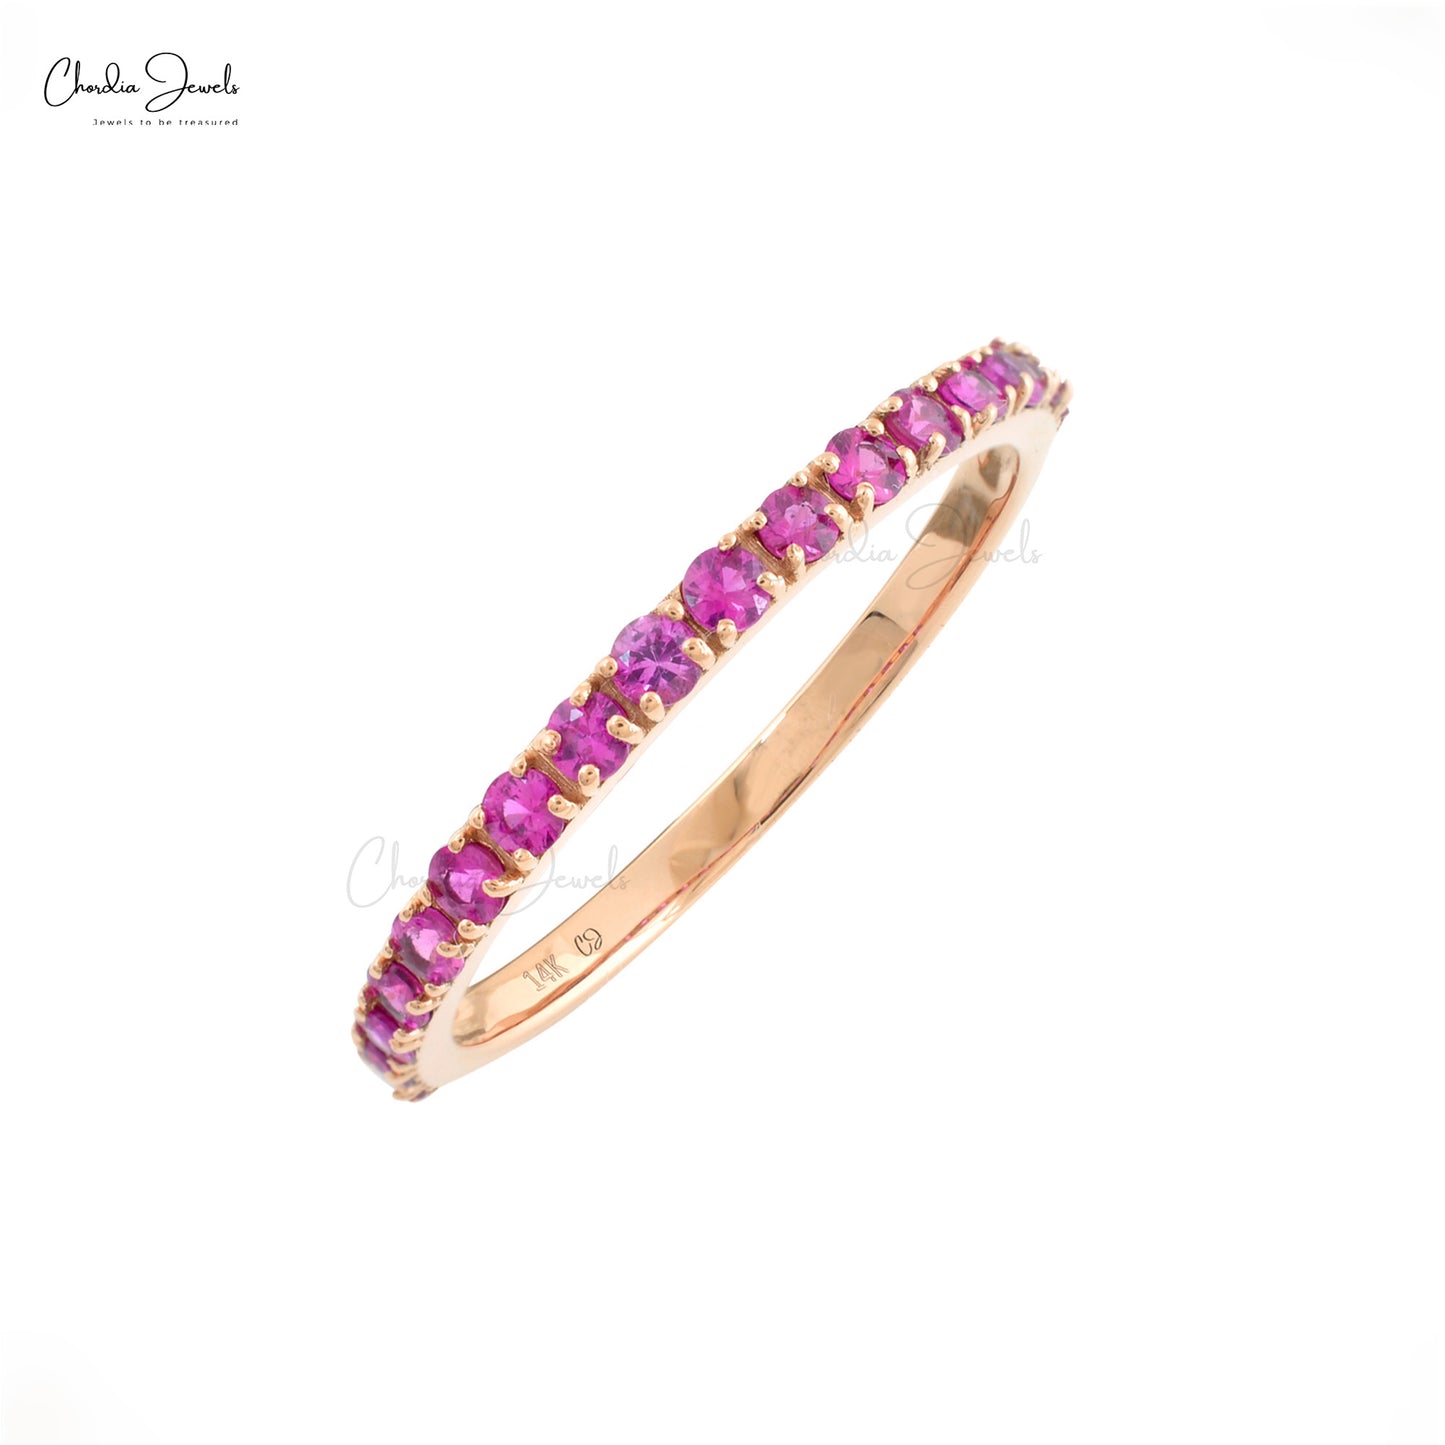 14K Solid Rose Gold September Birthstone Gemstone Half Eternity Band For Women, 0.51Cts Natural Pink Sapphire Band For Anniversary Gift